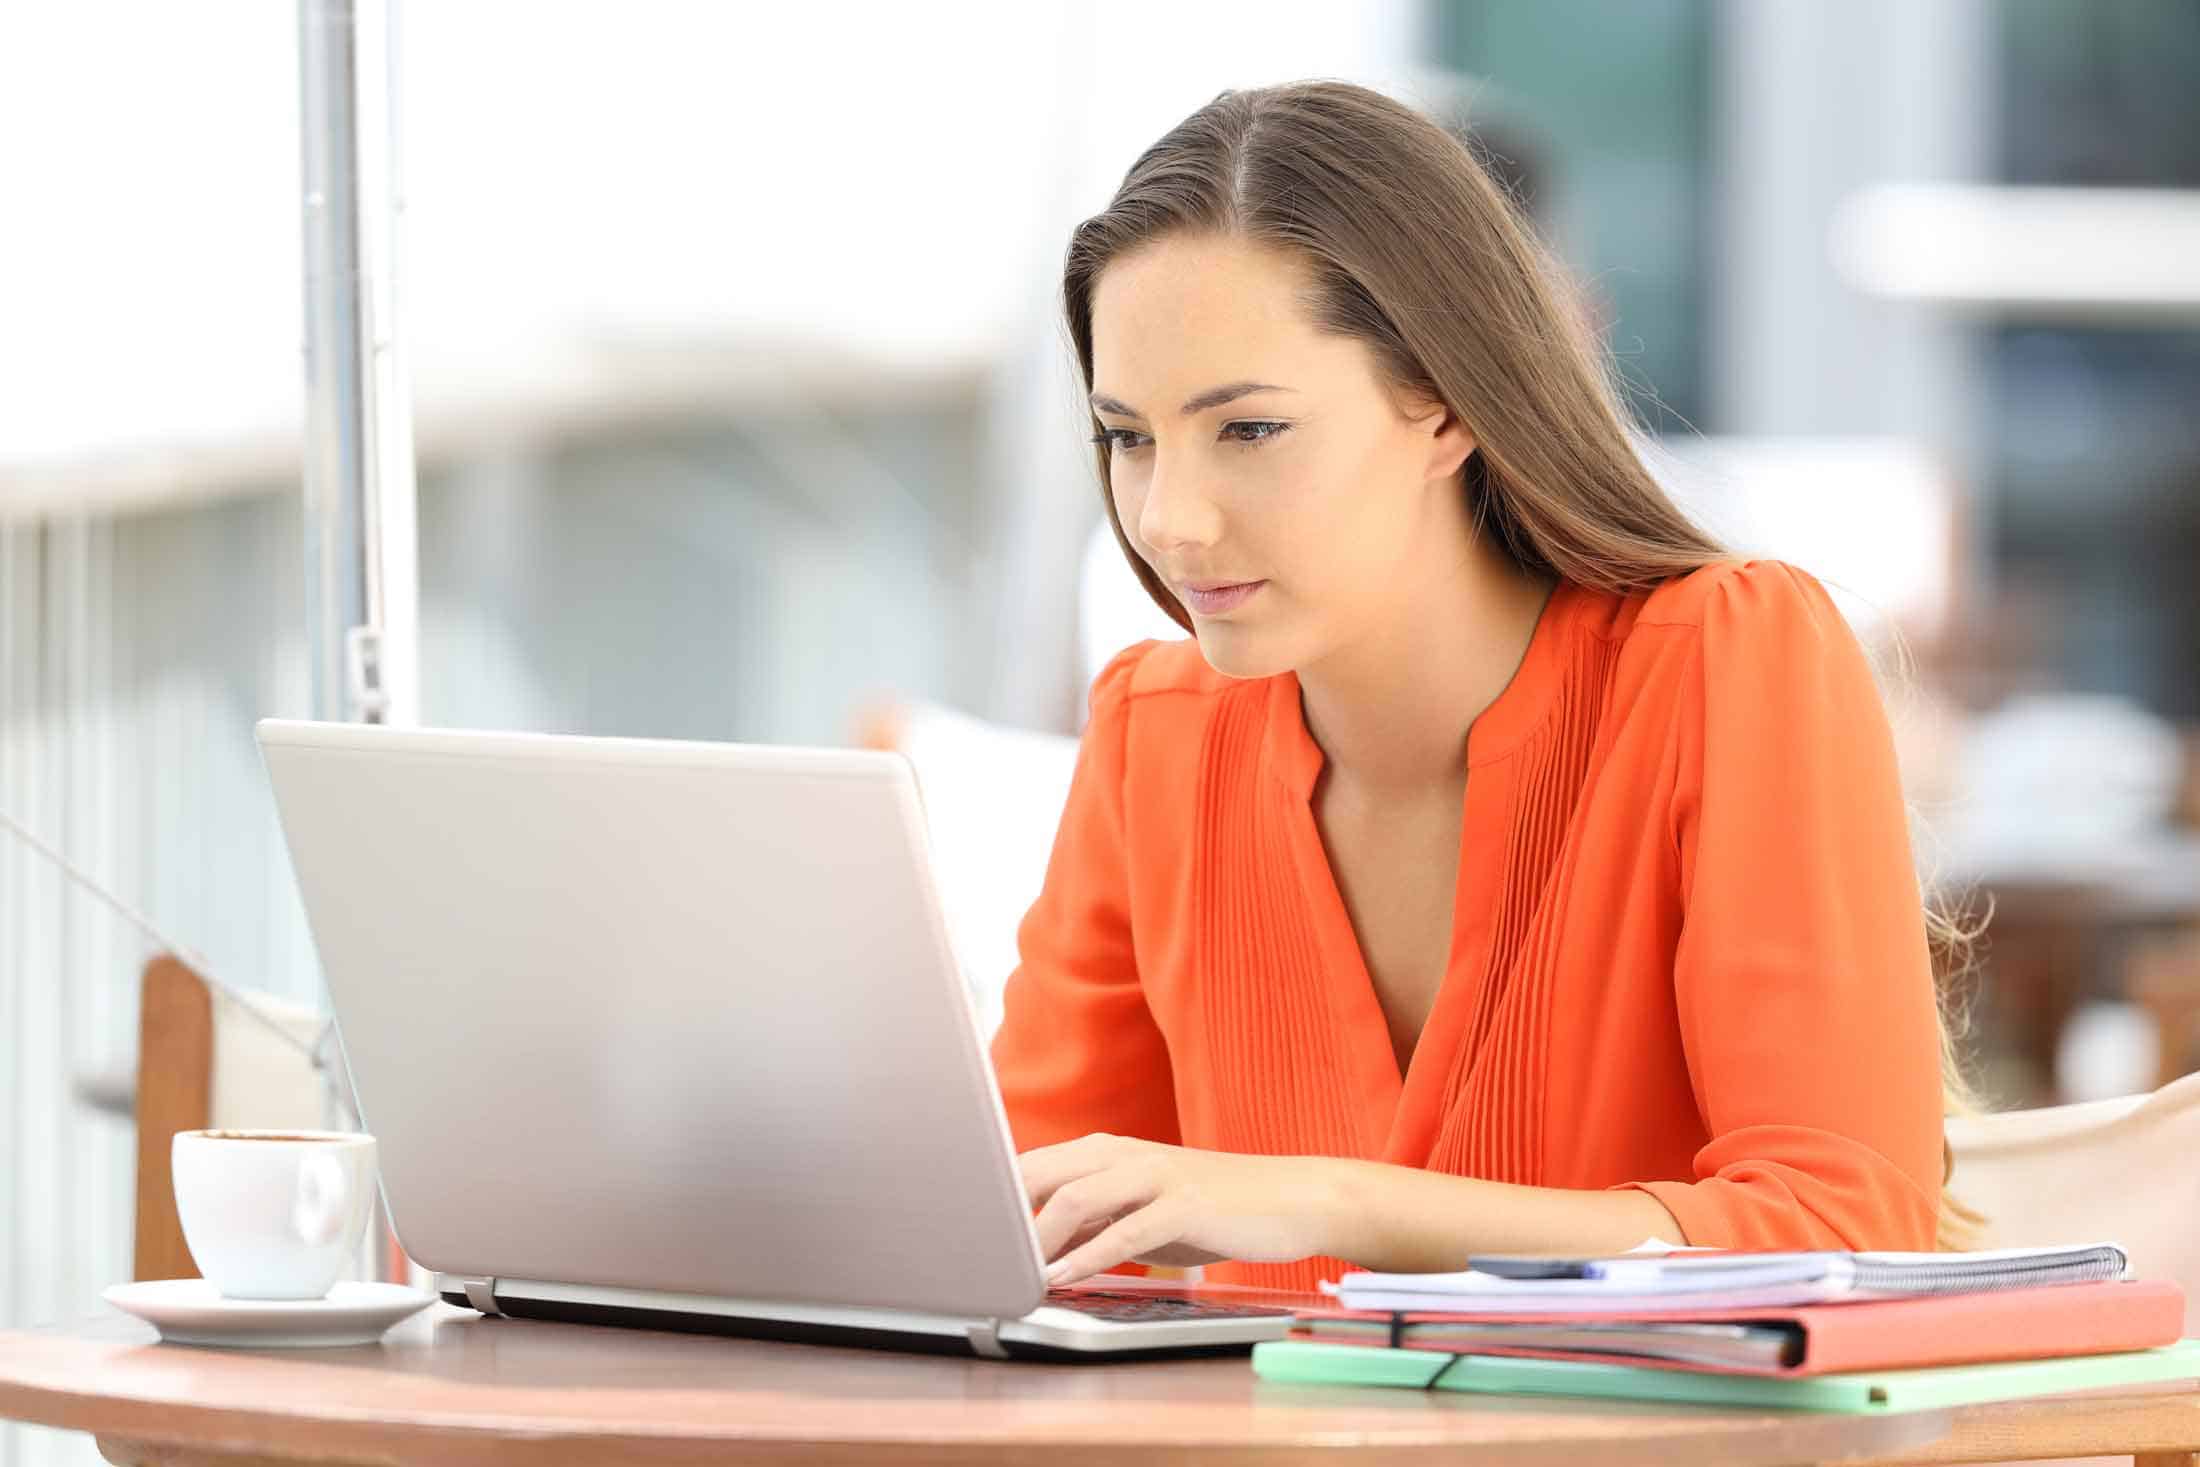 Woman in an orange shirt working on a laptop